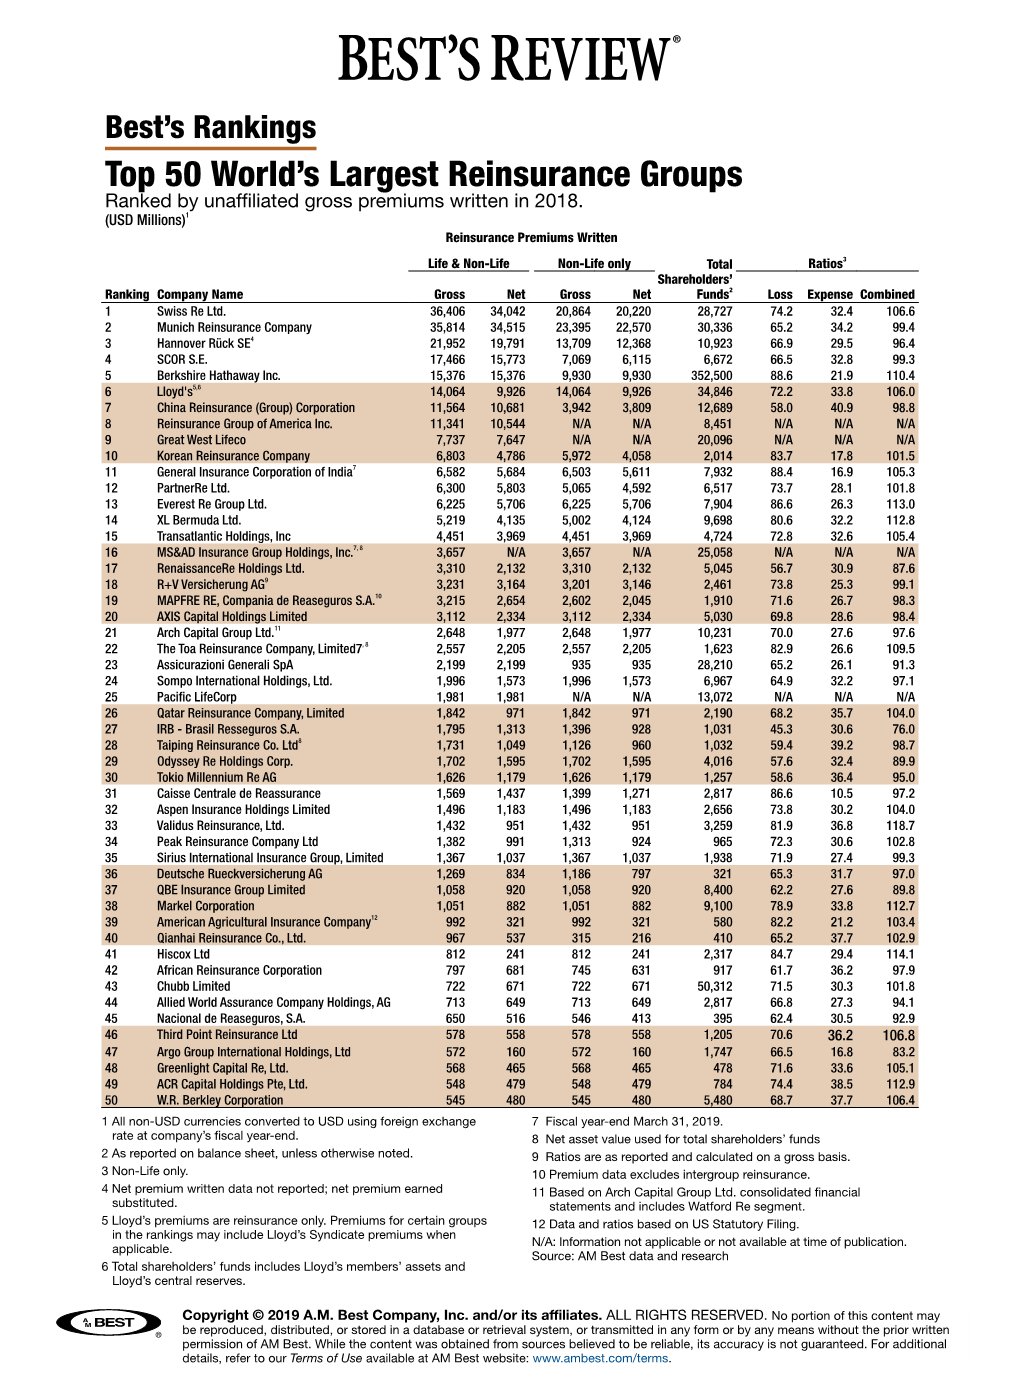 Top 50 World's Largest Reinsurance Groups